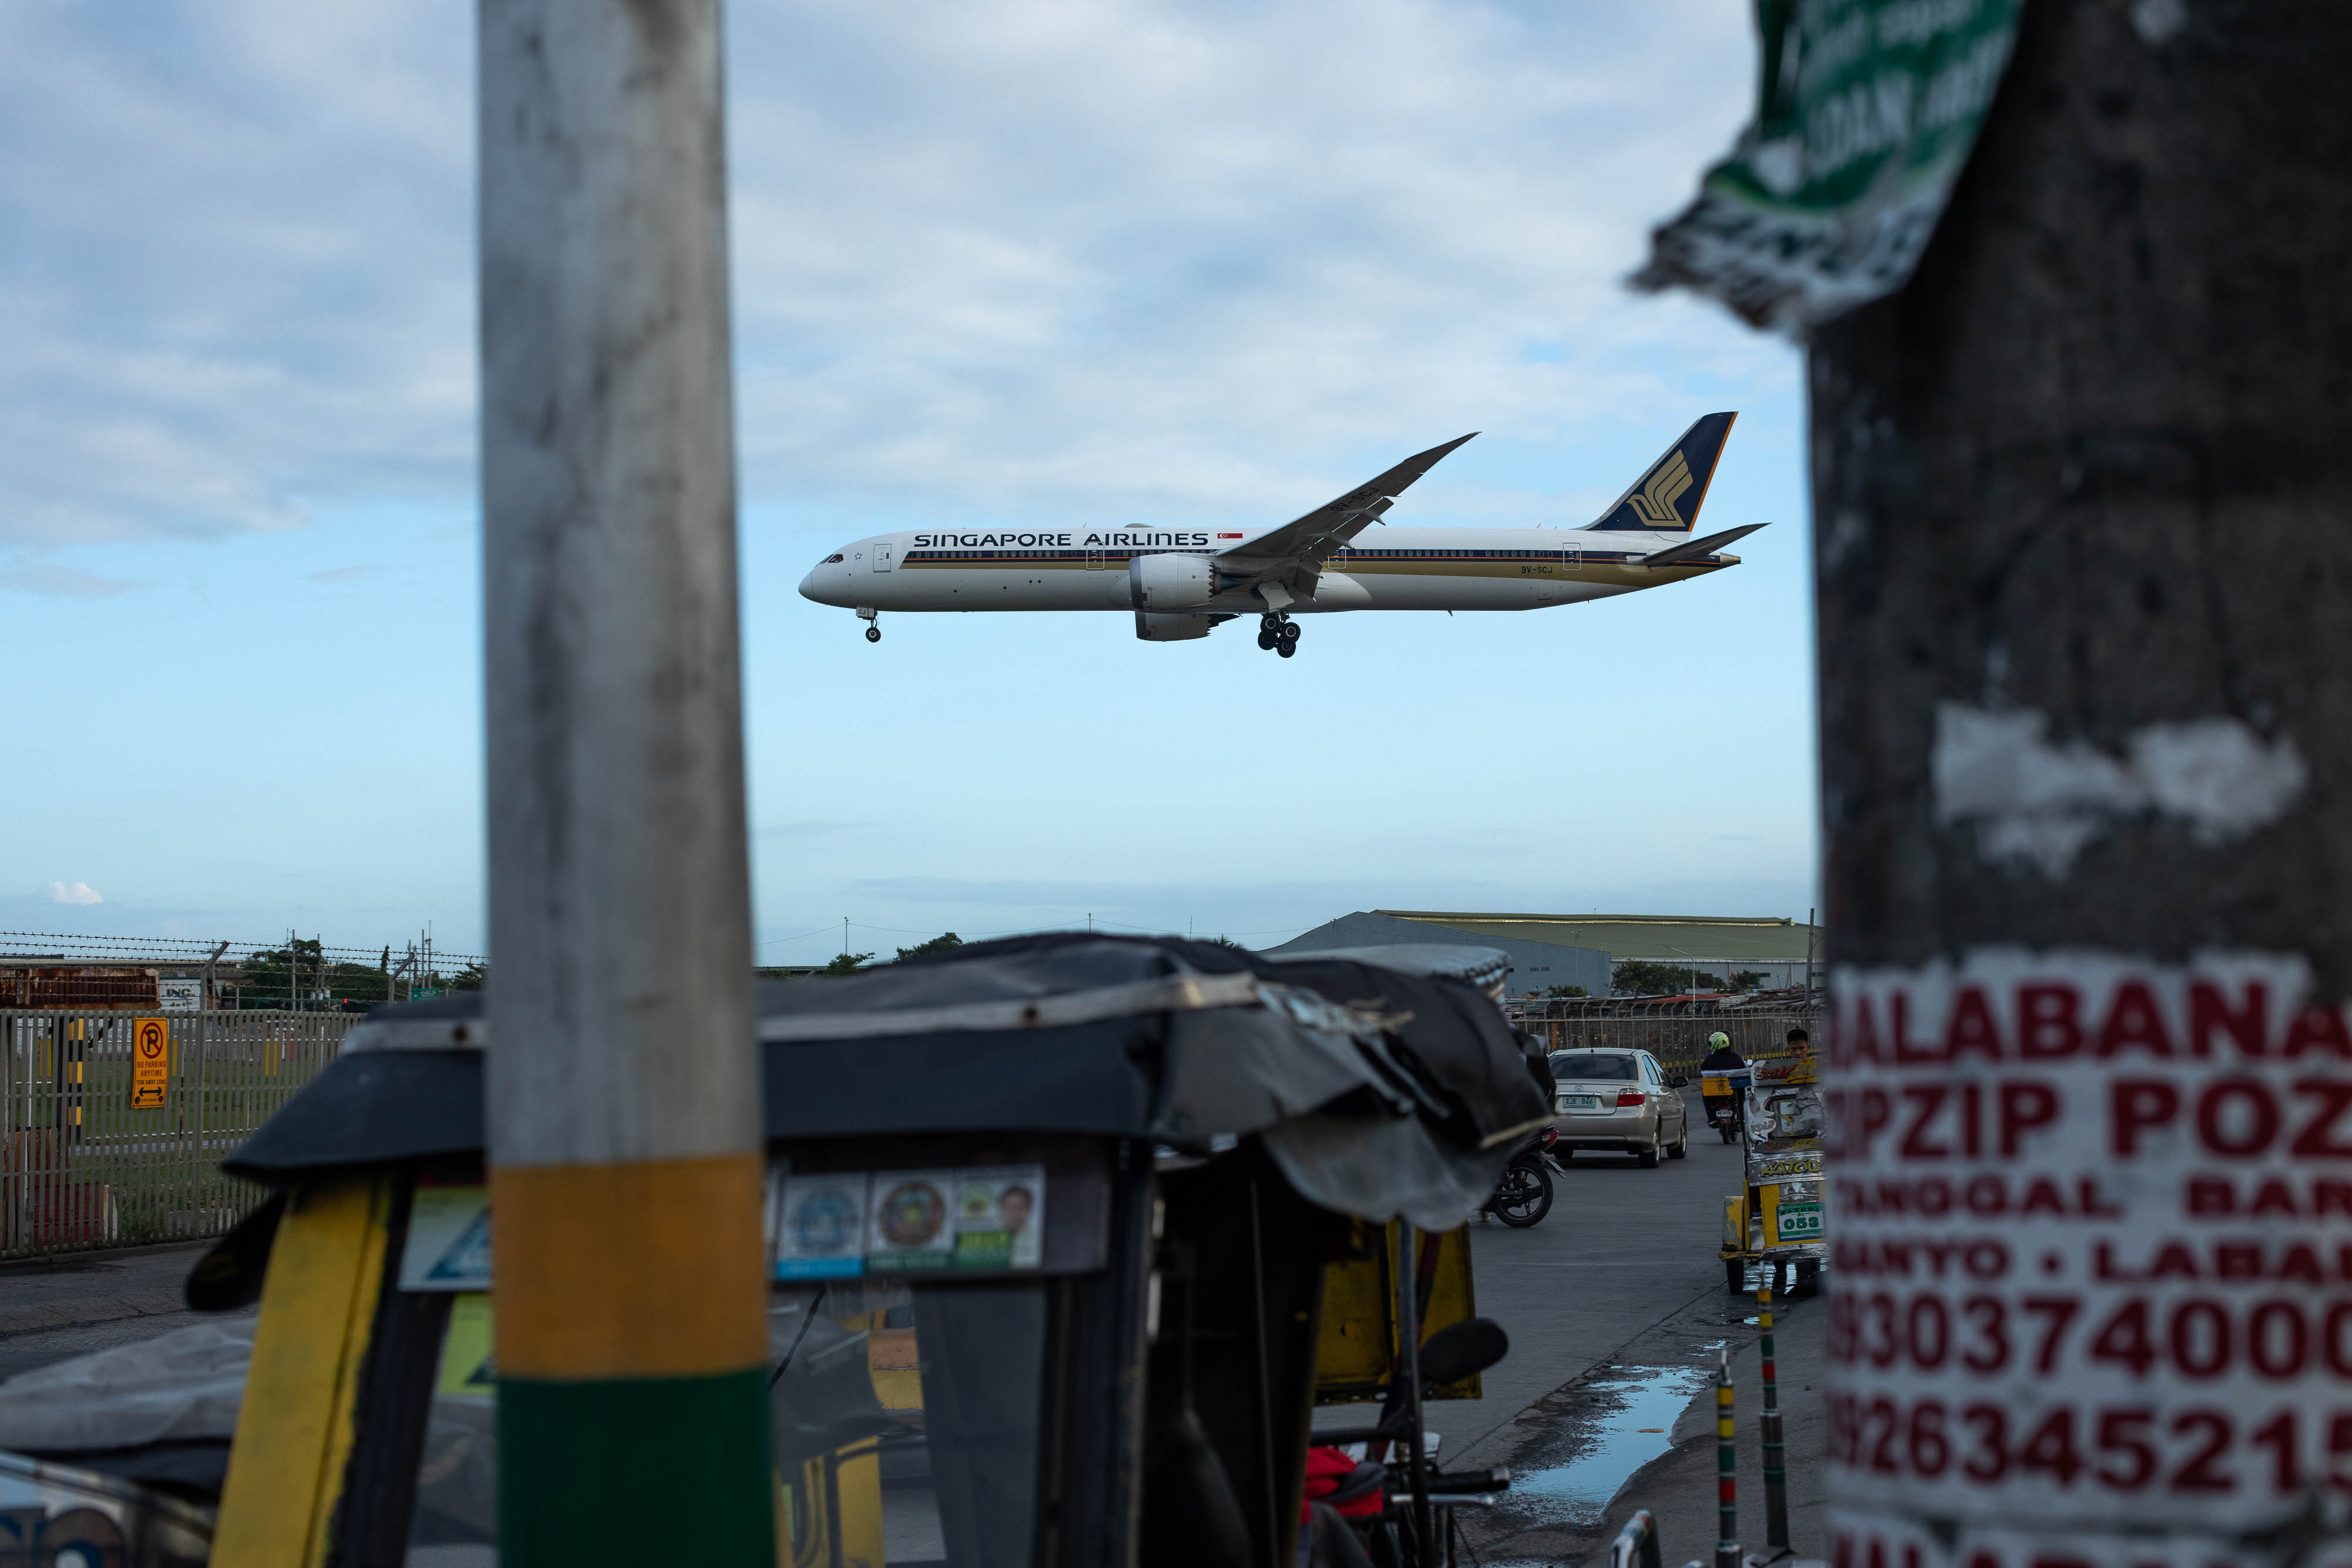 A Singapore Airlines plane prepares to land at Ninoy Aquino International Airport in Manila, Philippines, on February 13.